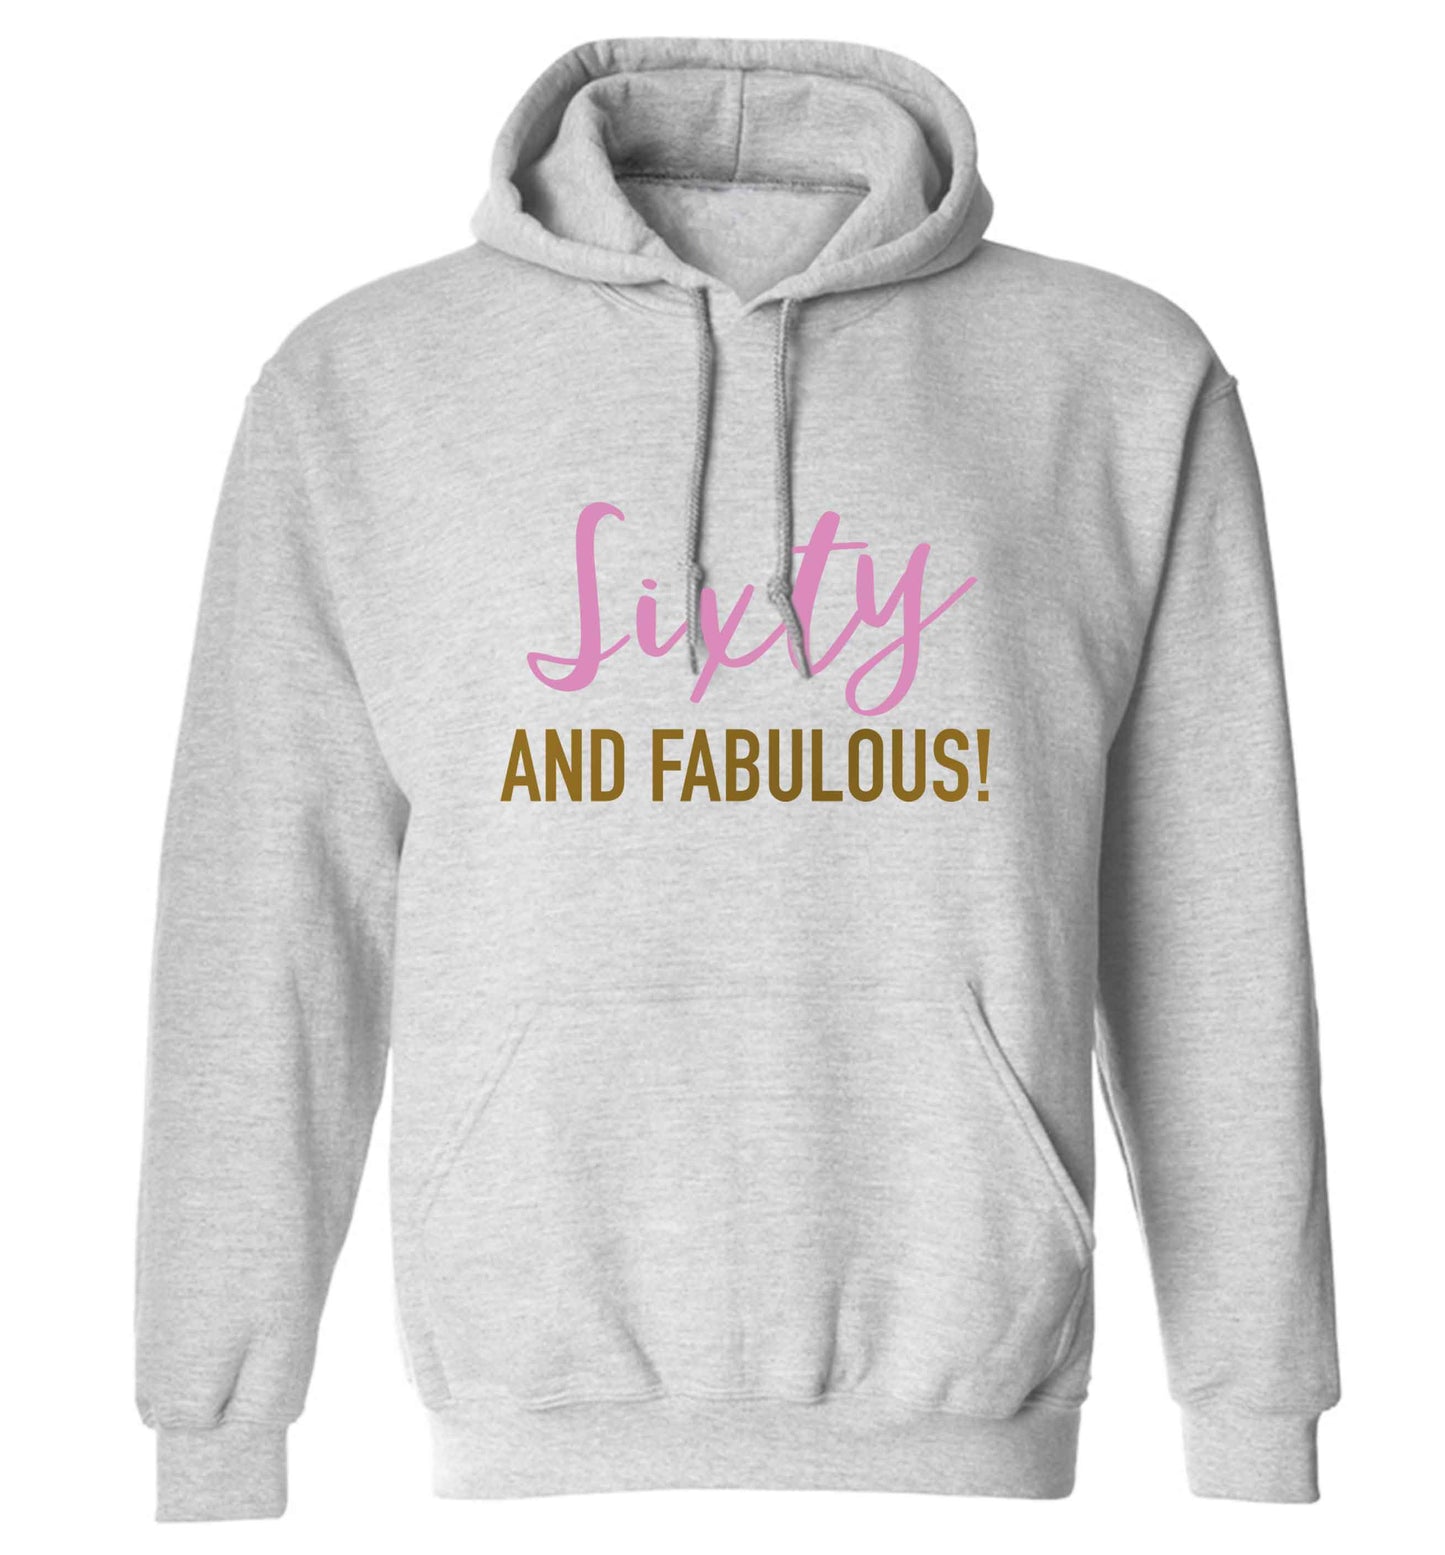 Sixty and fabulous adults unisex grey hoodie 2XL